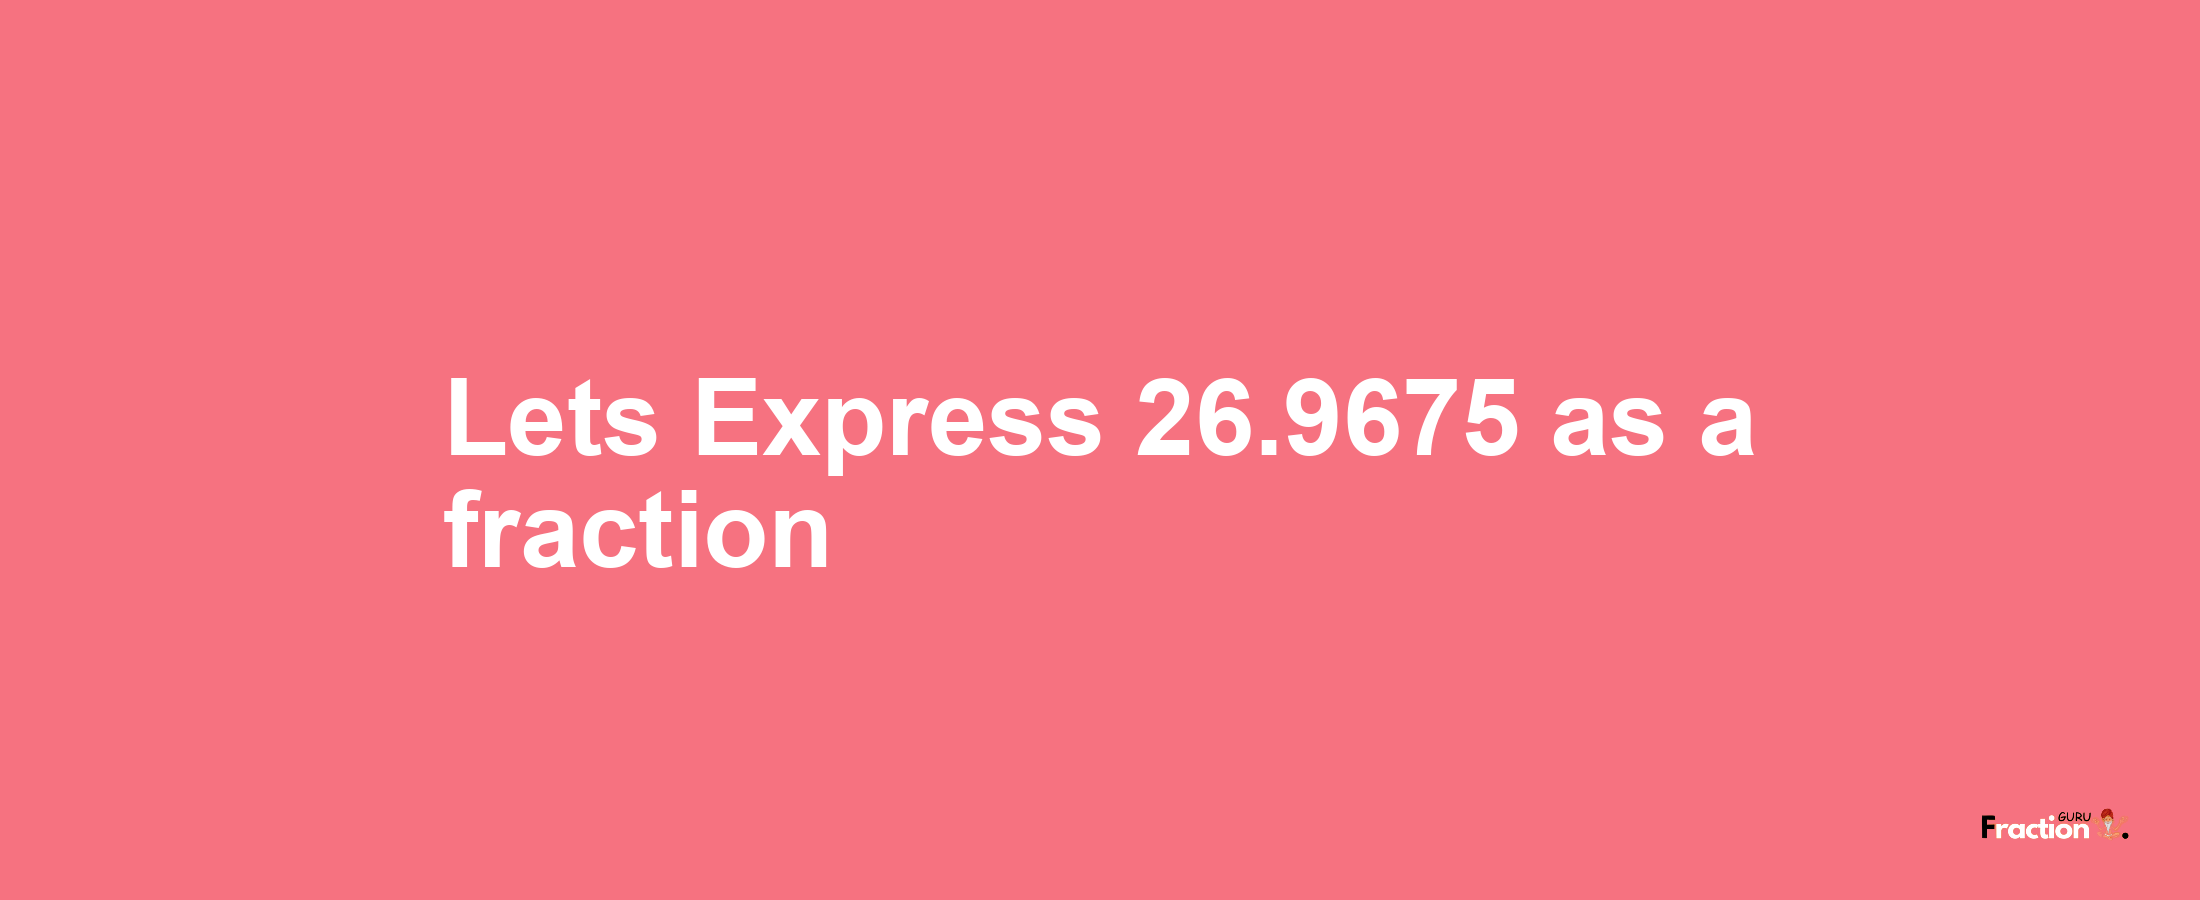 Lets Express 26.9675 as afraction